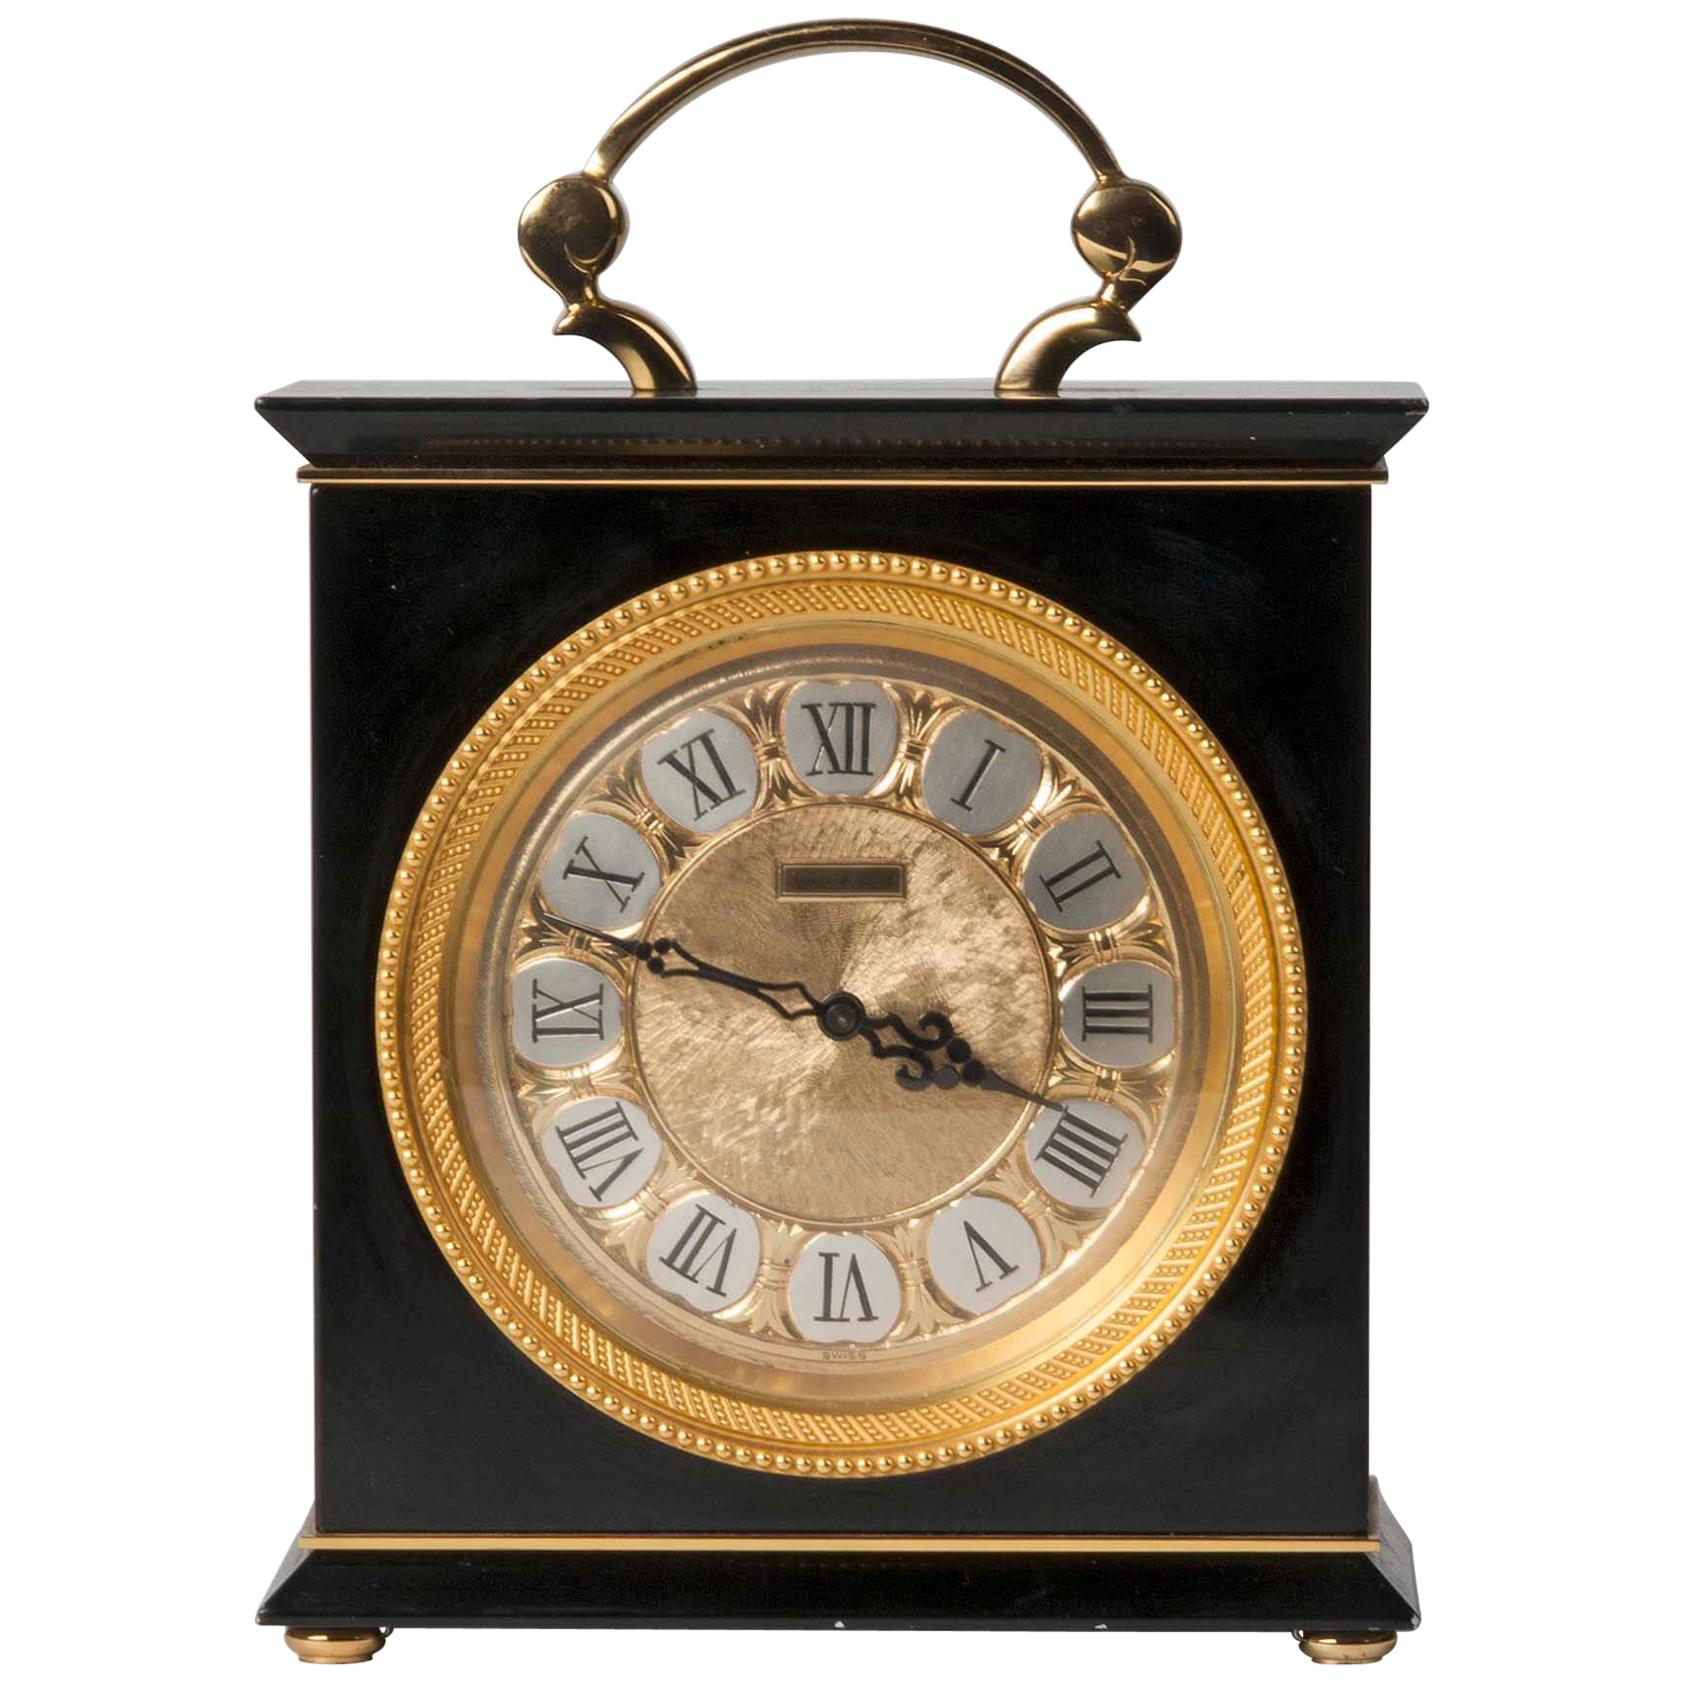 Hollywood Regency Style Mantel Clock by Jaeger LeCoultre